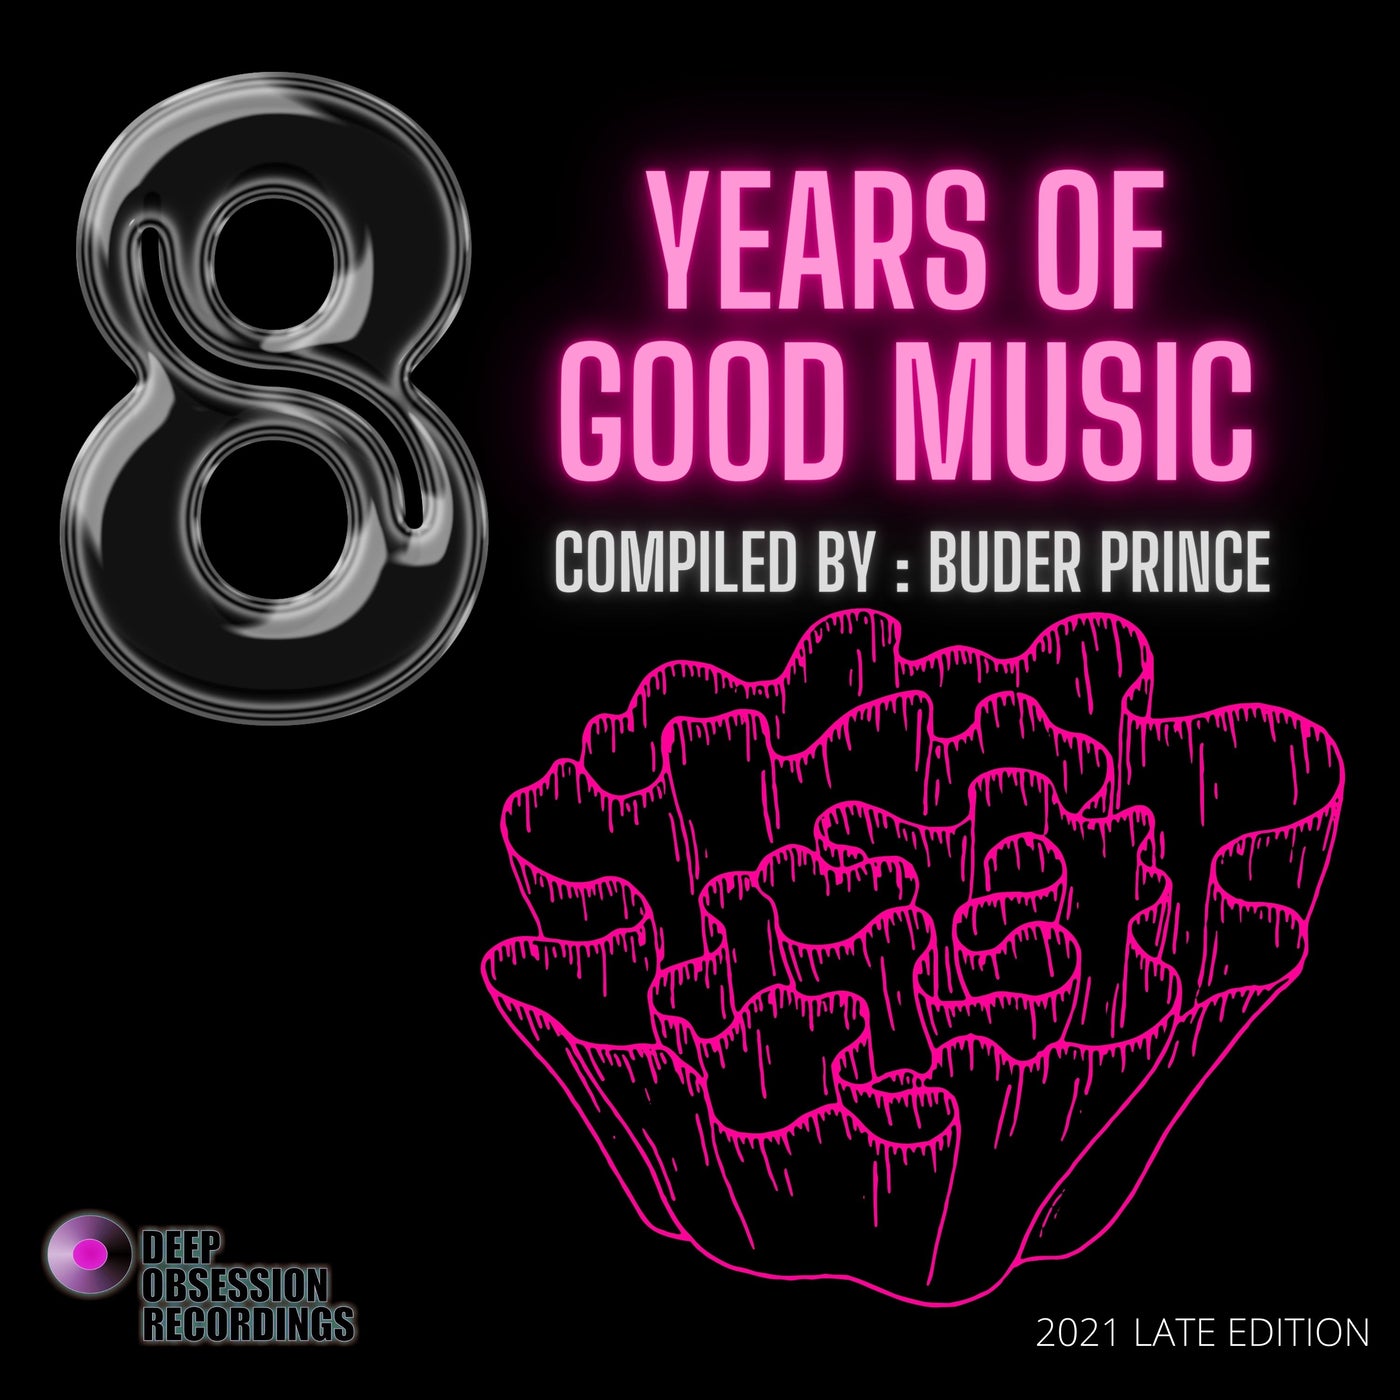 8 Years Of Good Music Compiled by Buder Prince